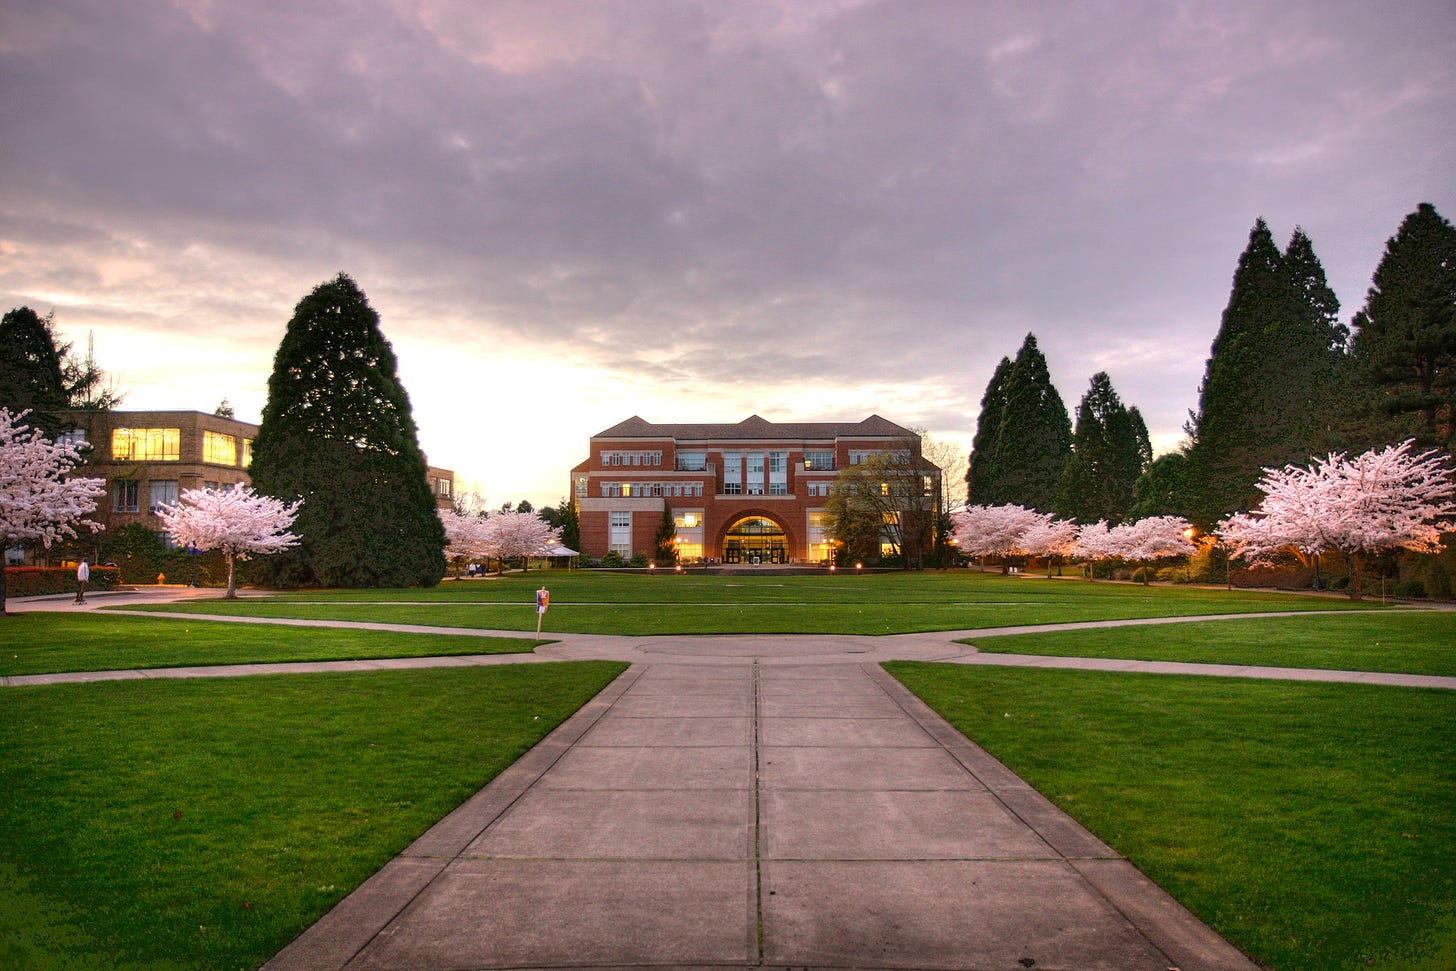 A grassy quad area at the University of Portland, with sidewalks, blooming trees, and a building in the distance.